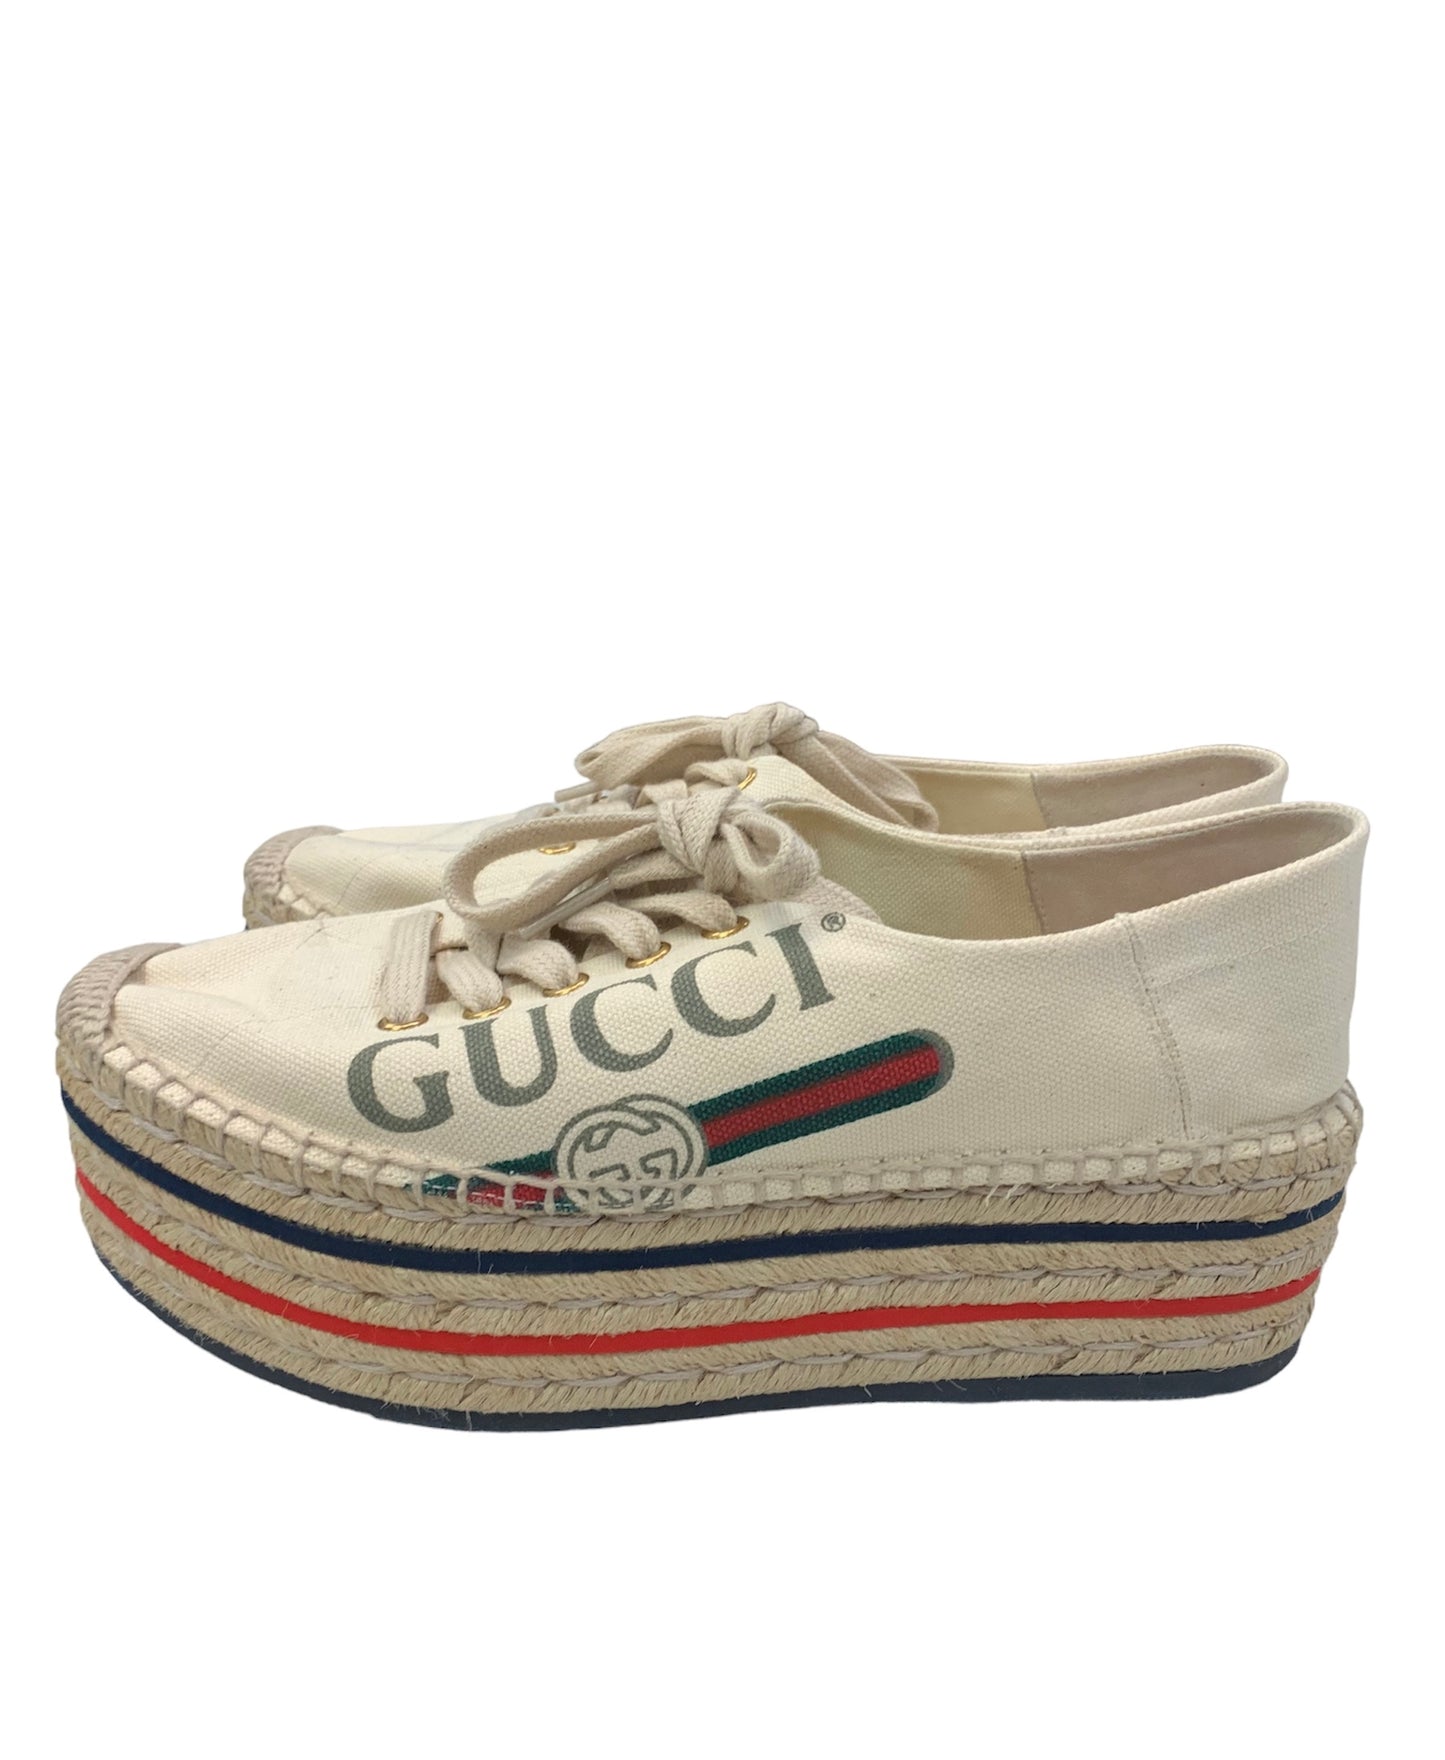 Shoes Designer By Gucci  Size: 6.5